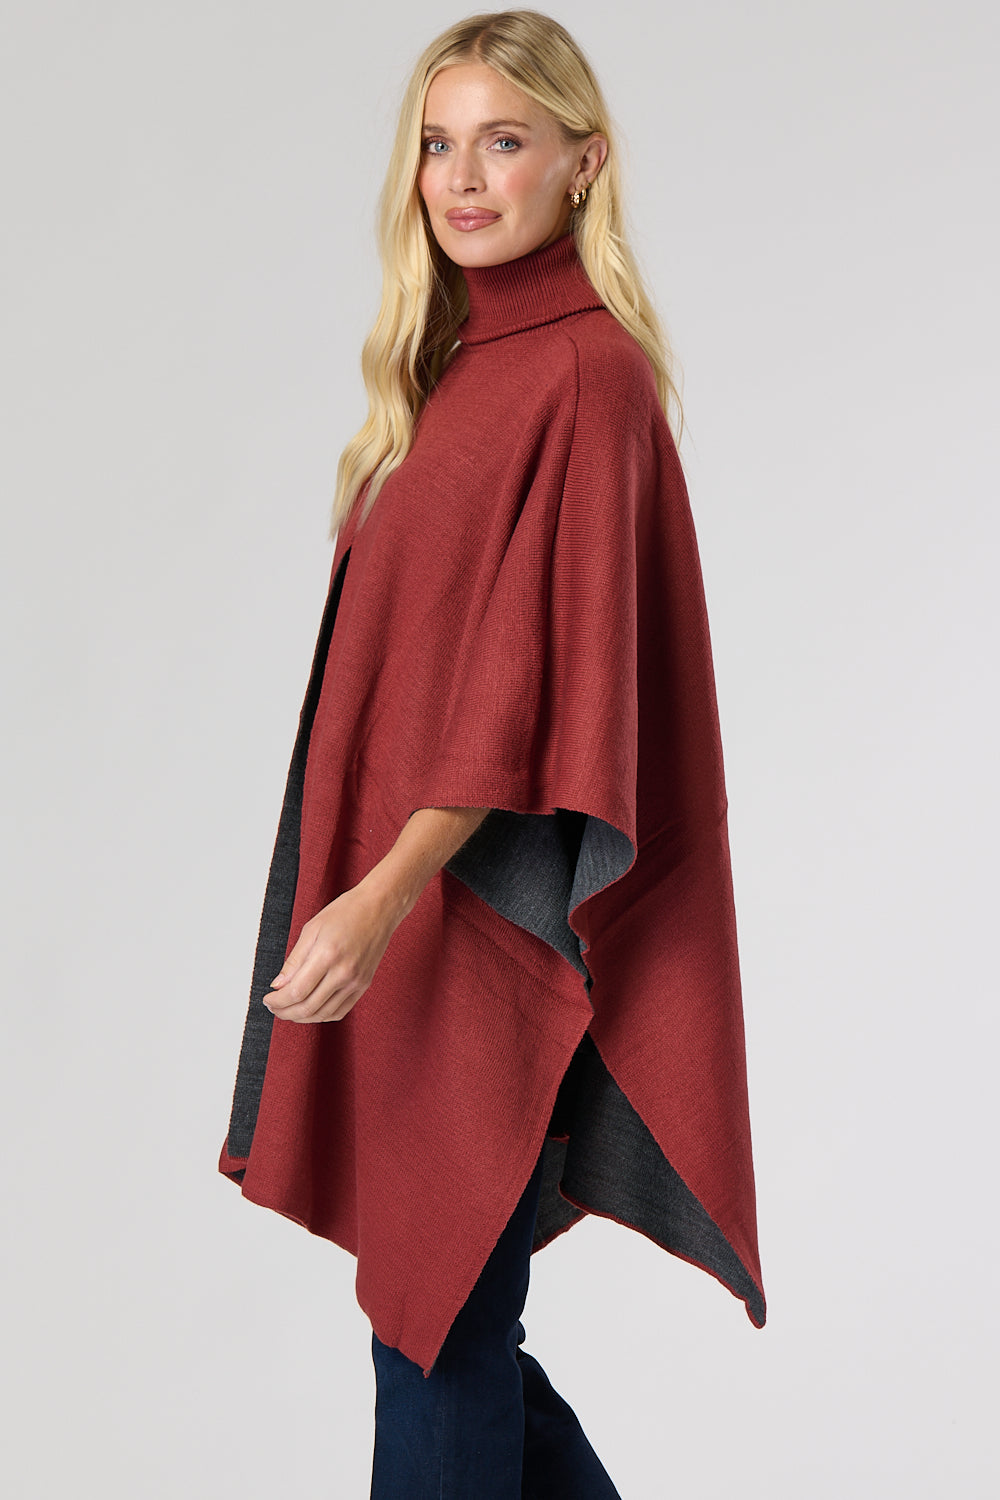 Saloos Knitted Split Front Poncho